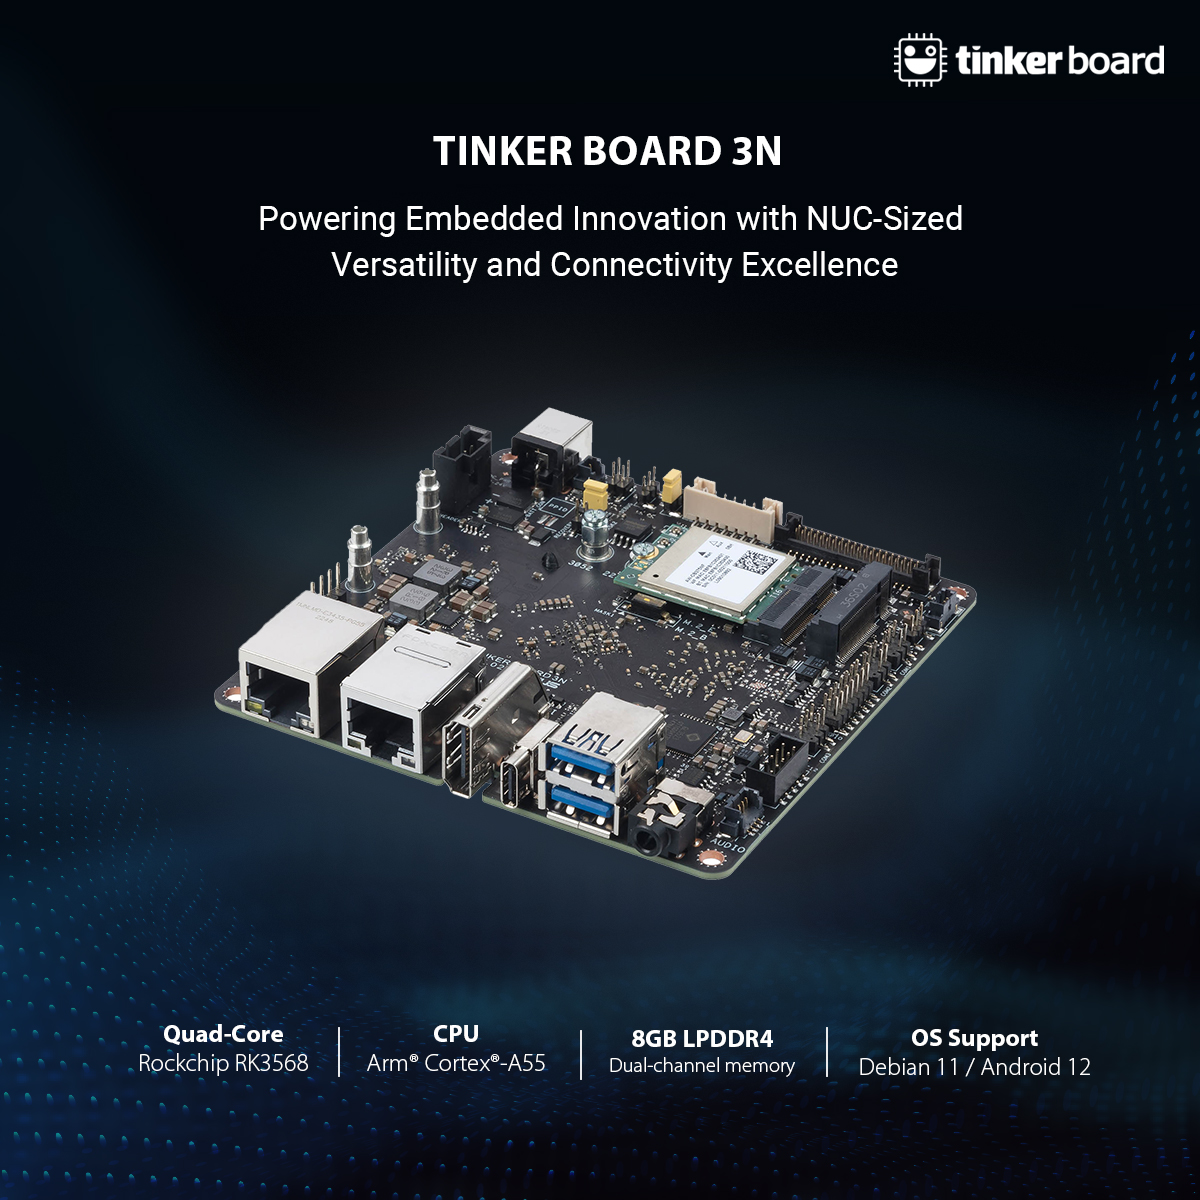 Get ultimate computing performance with the ASUS Tinker Board 3N! This ultra-reliable single-board computer delivers superior performance, secure data processing, and efficient thermal management.

Know more 👉in.asus.click/3ntw

#ASUS #IoT #IndustrialPC #AIoT #TinkerBoard